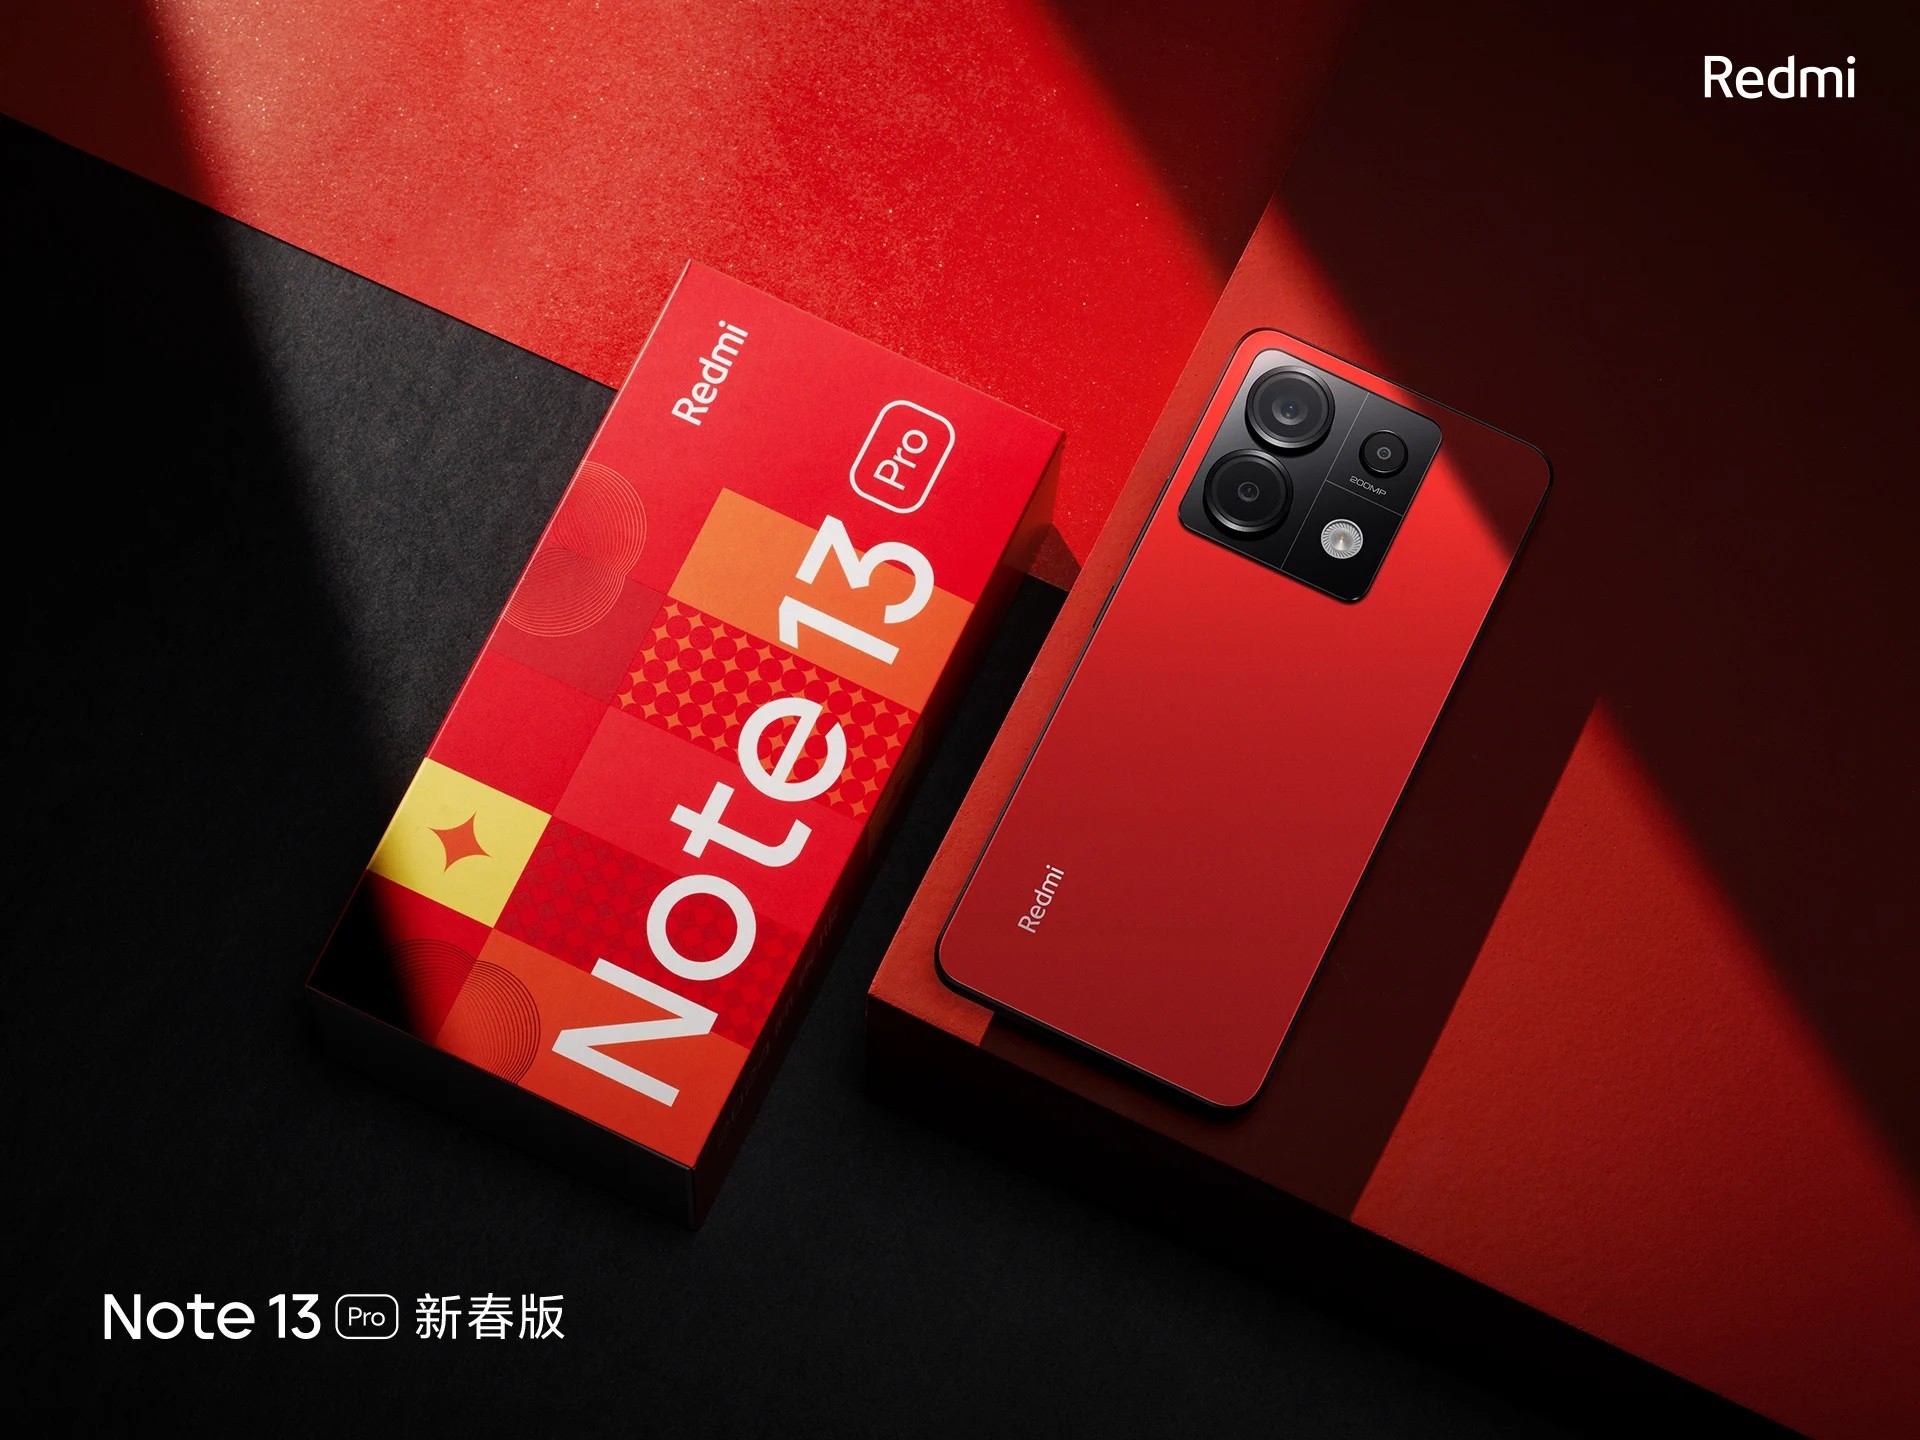 redmi-note-13-pro-new-year-special-1-1706171552.jpg